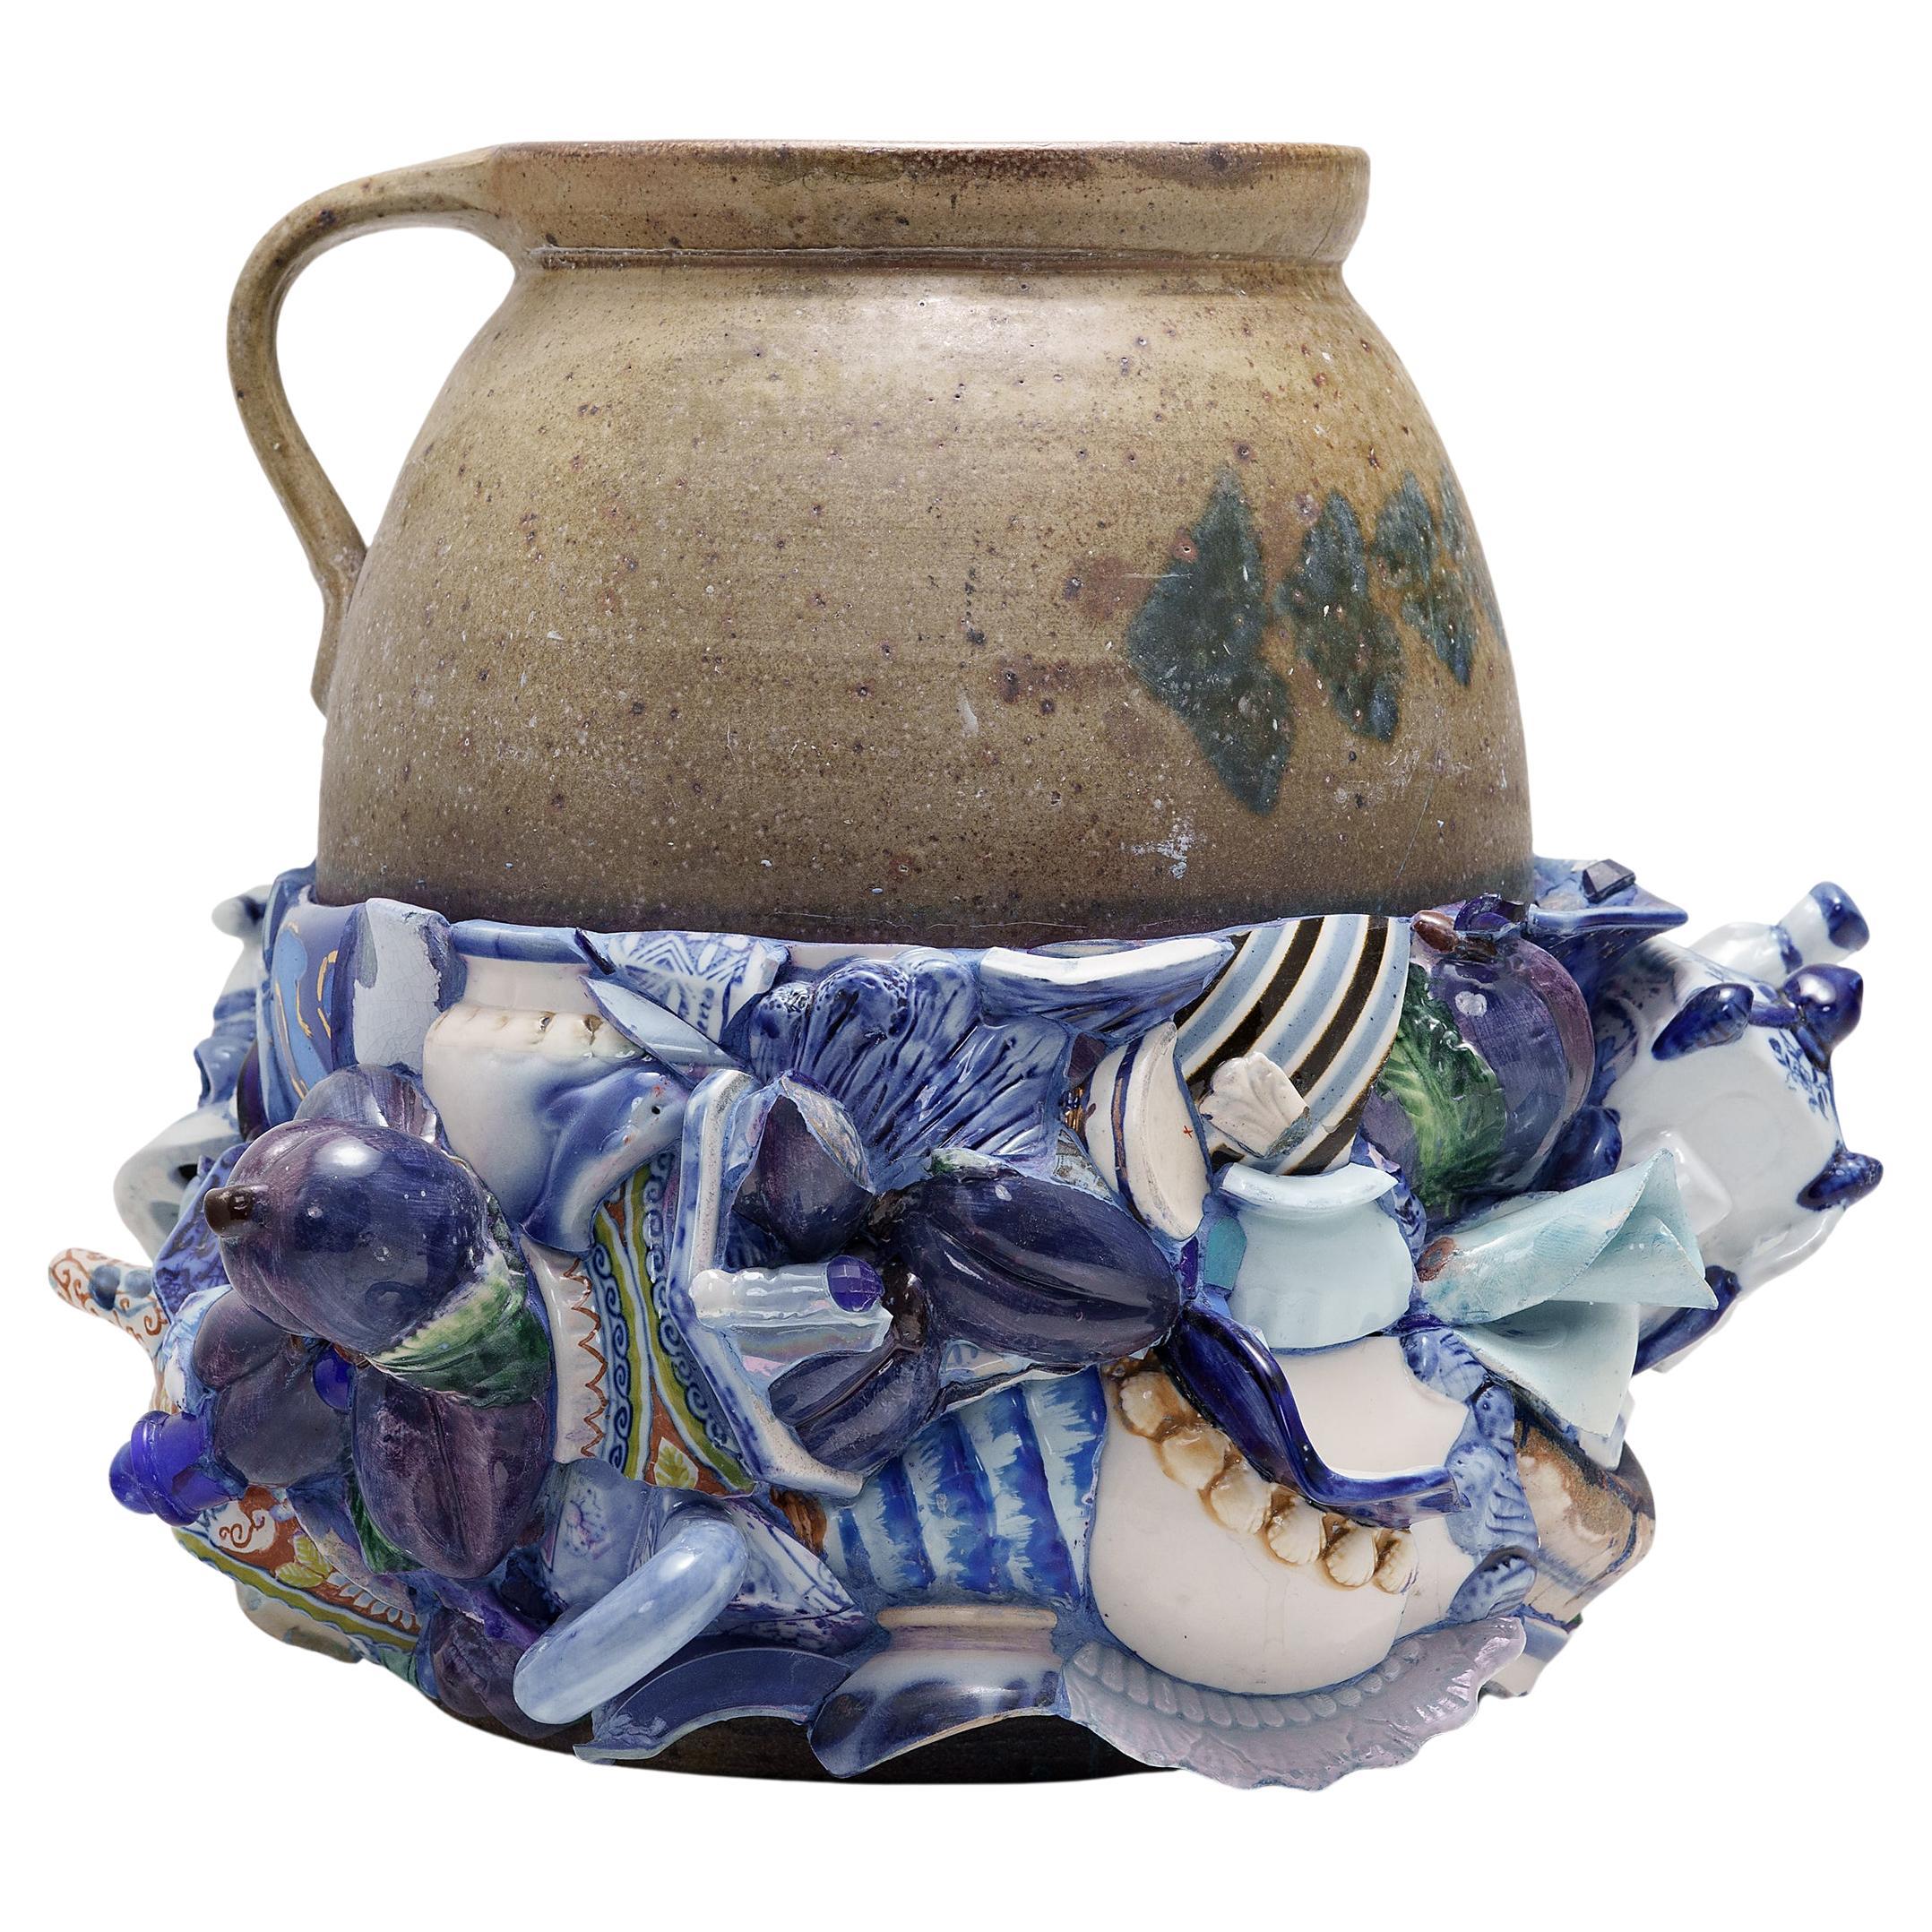 "Caress of Water" Memory Jug by Michael Thompson